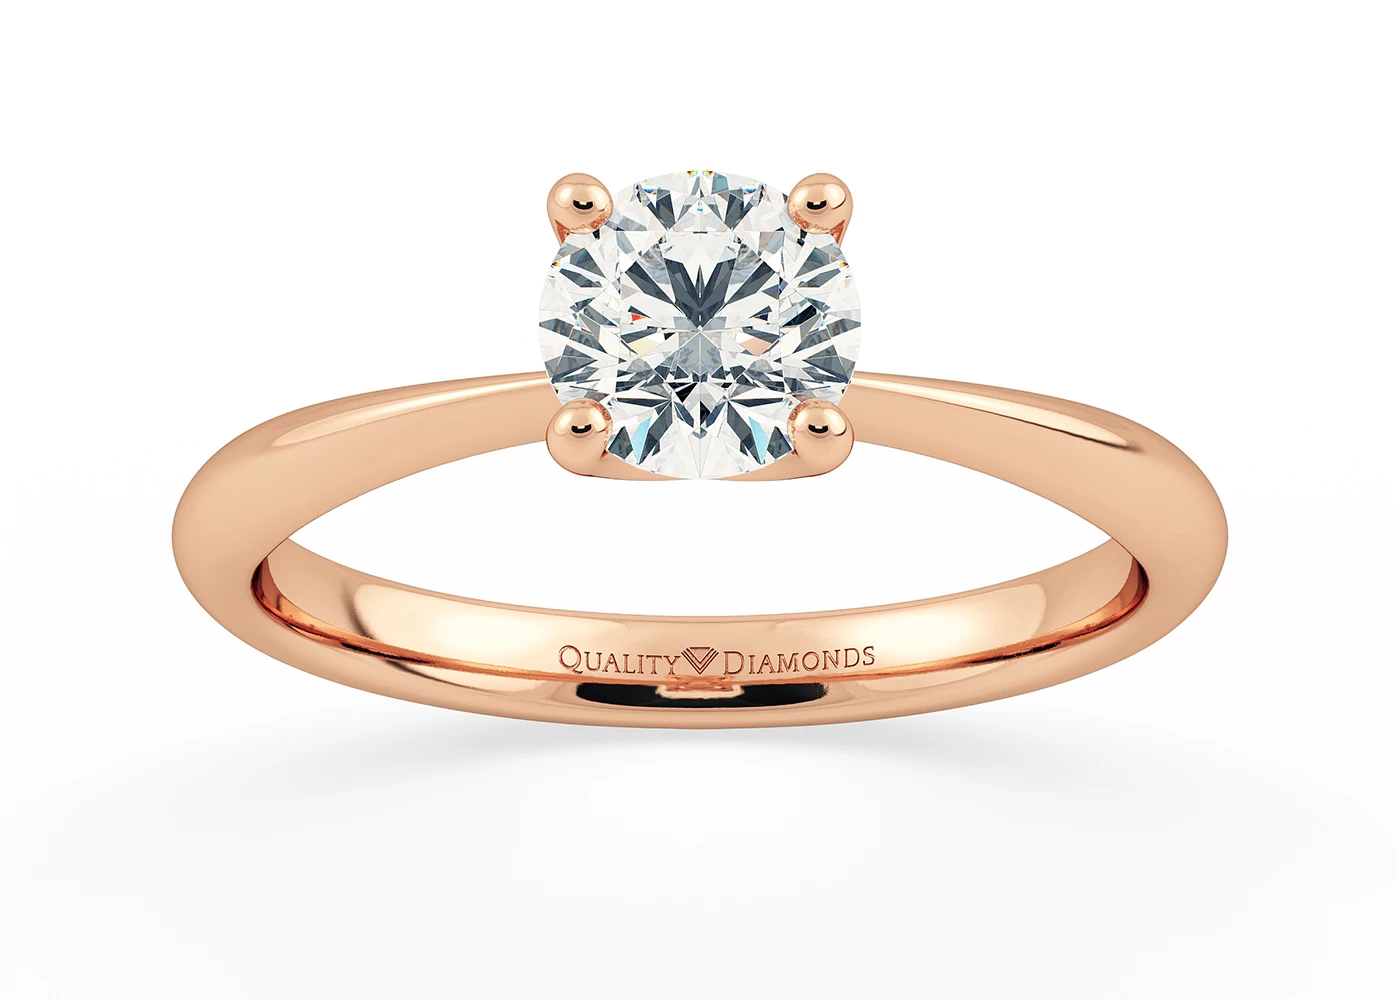 Two Carat Round Brilliant Solitaire Diamond Engagement Ring in 18K Rose Gold